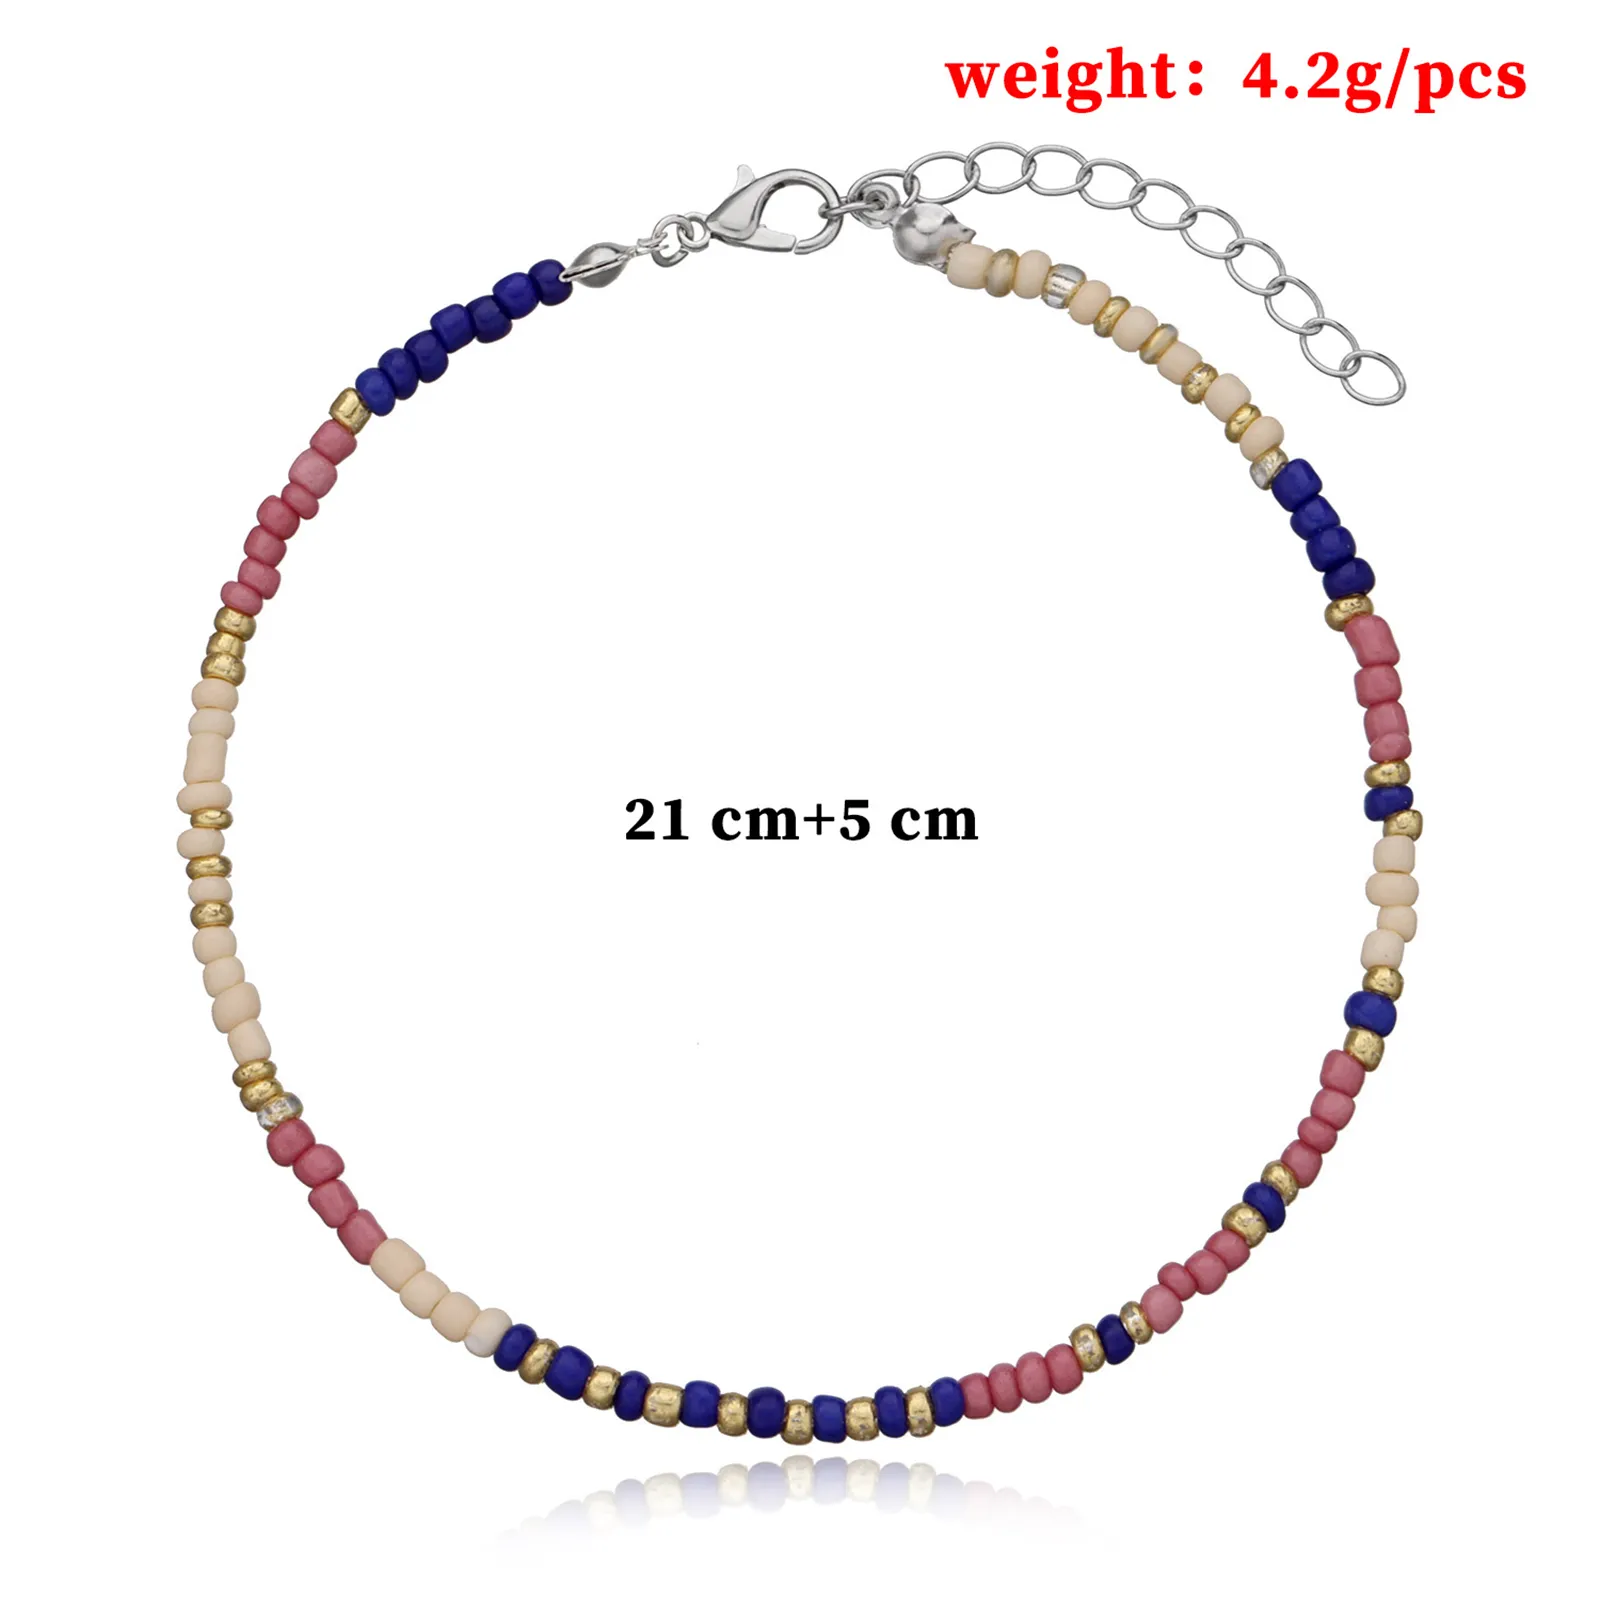 Handmade Flower Daisy Bead Anklet Bracelet Adjusted For Women Bohemian Colorful Seed Bead Elastic Stretch Ankle Jewelry Gift3615713